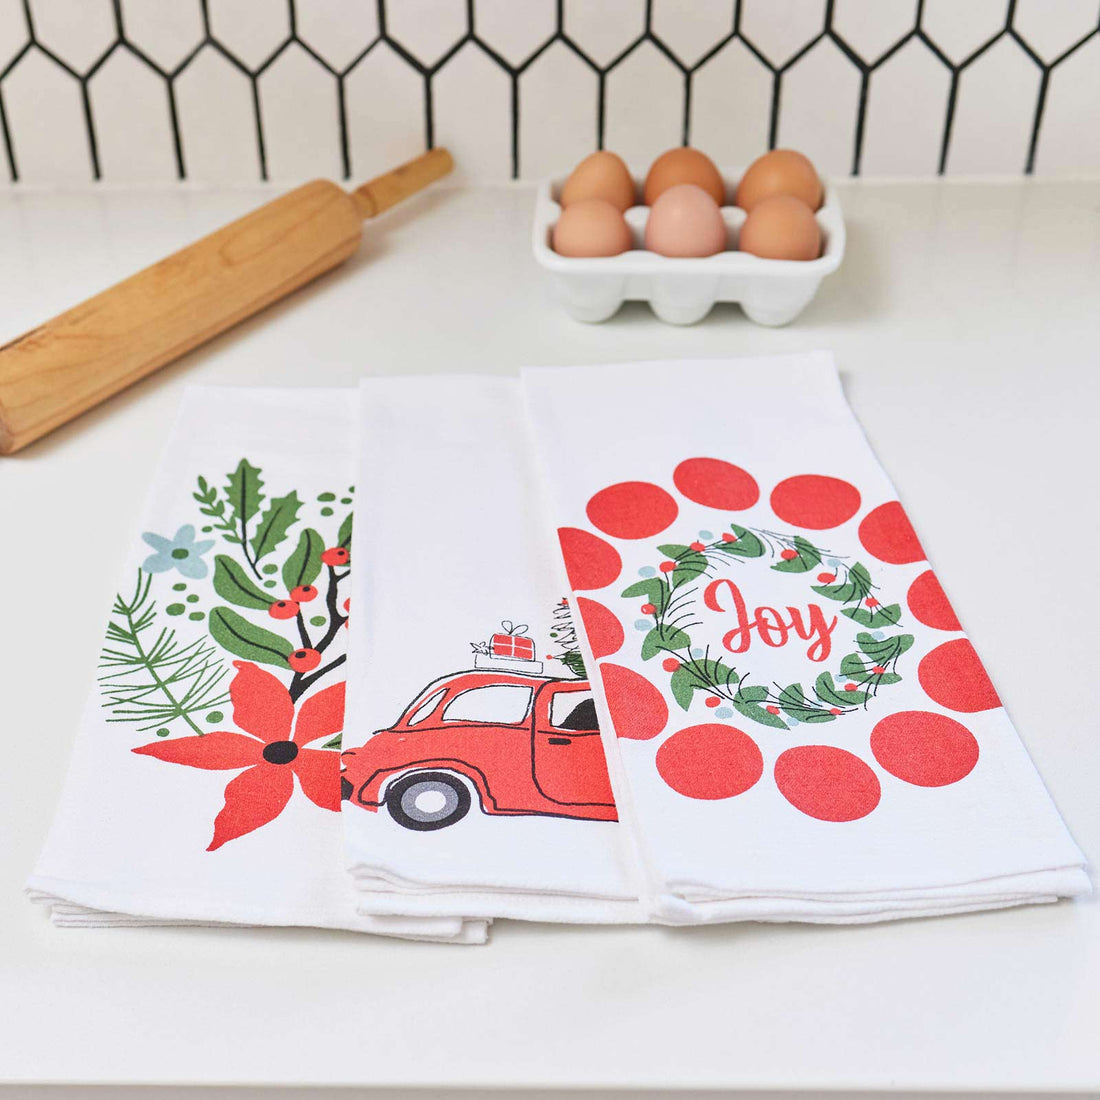 Seasonal and Holiday Cotton Kitchen Towels Set Of 3